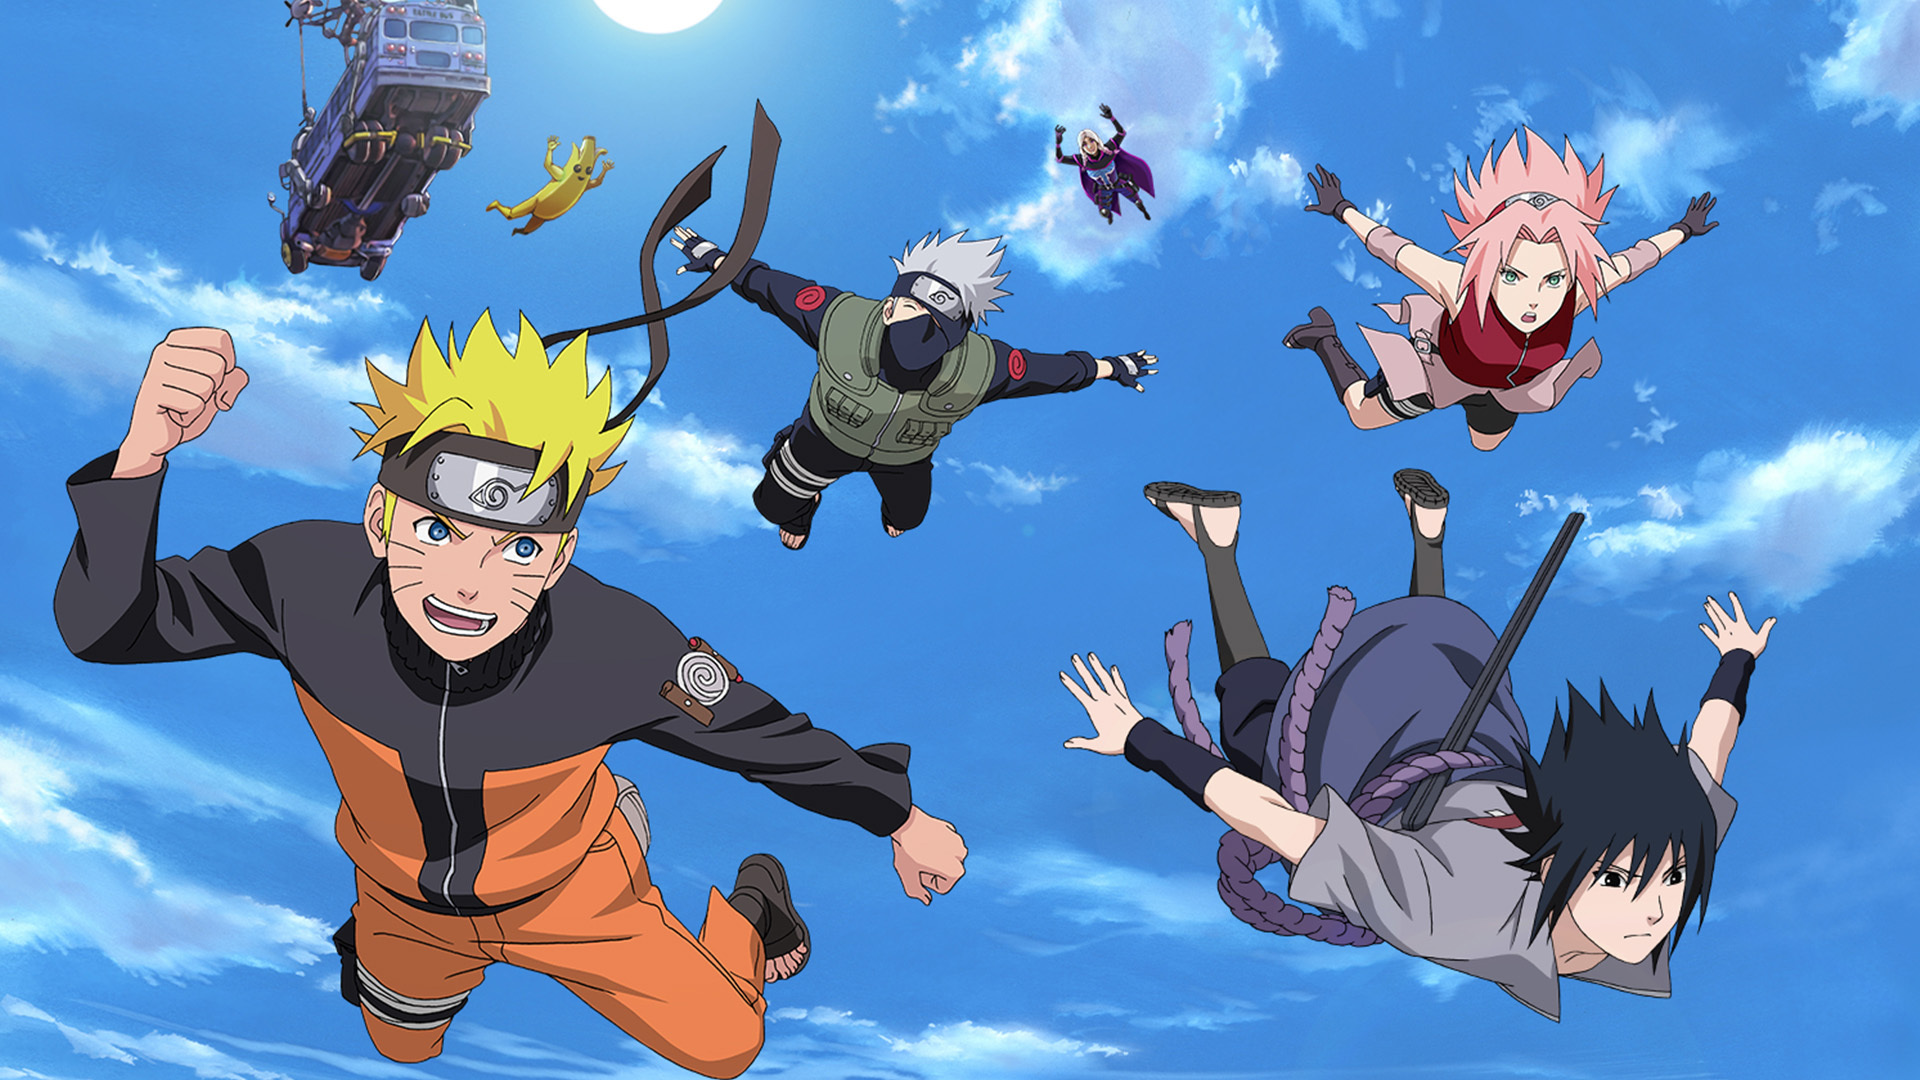 Where we dropping, Team 7?